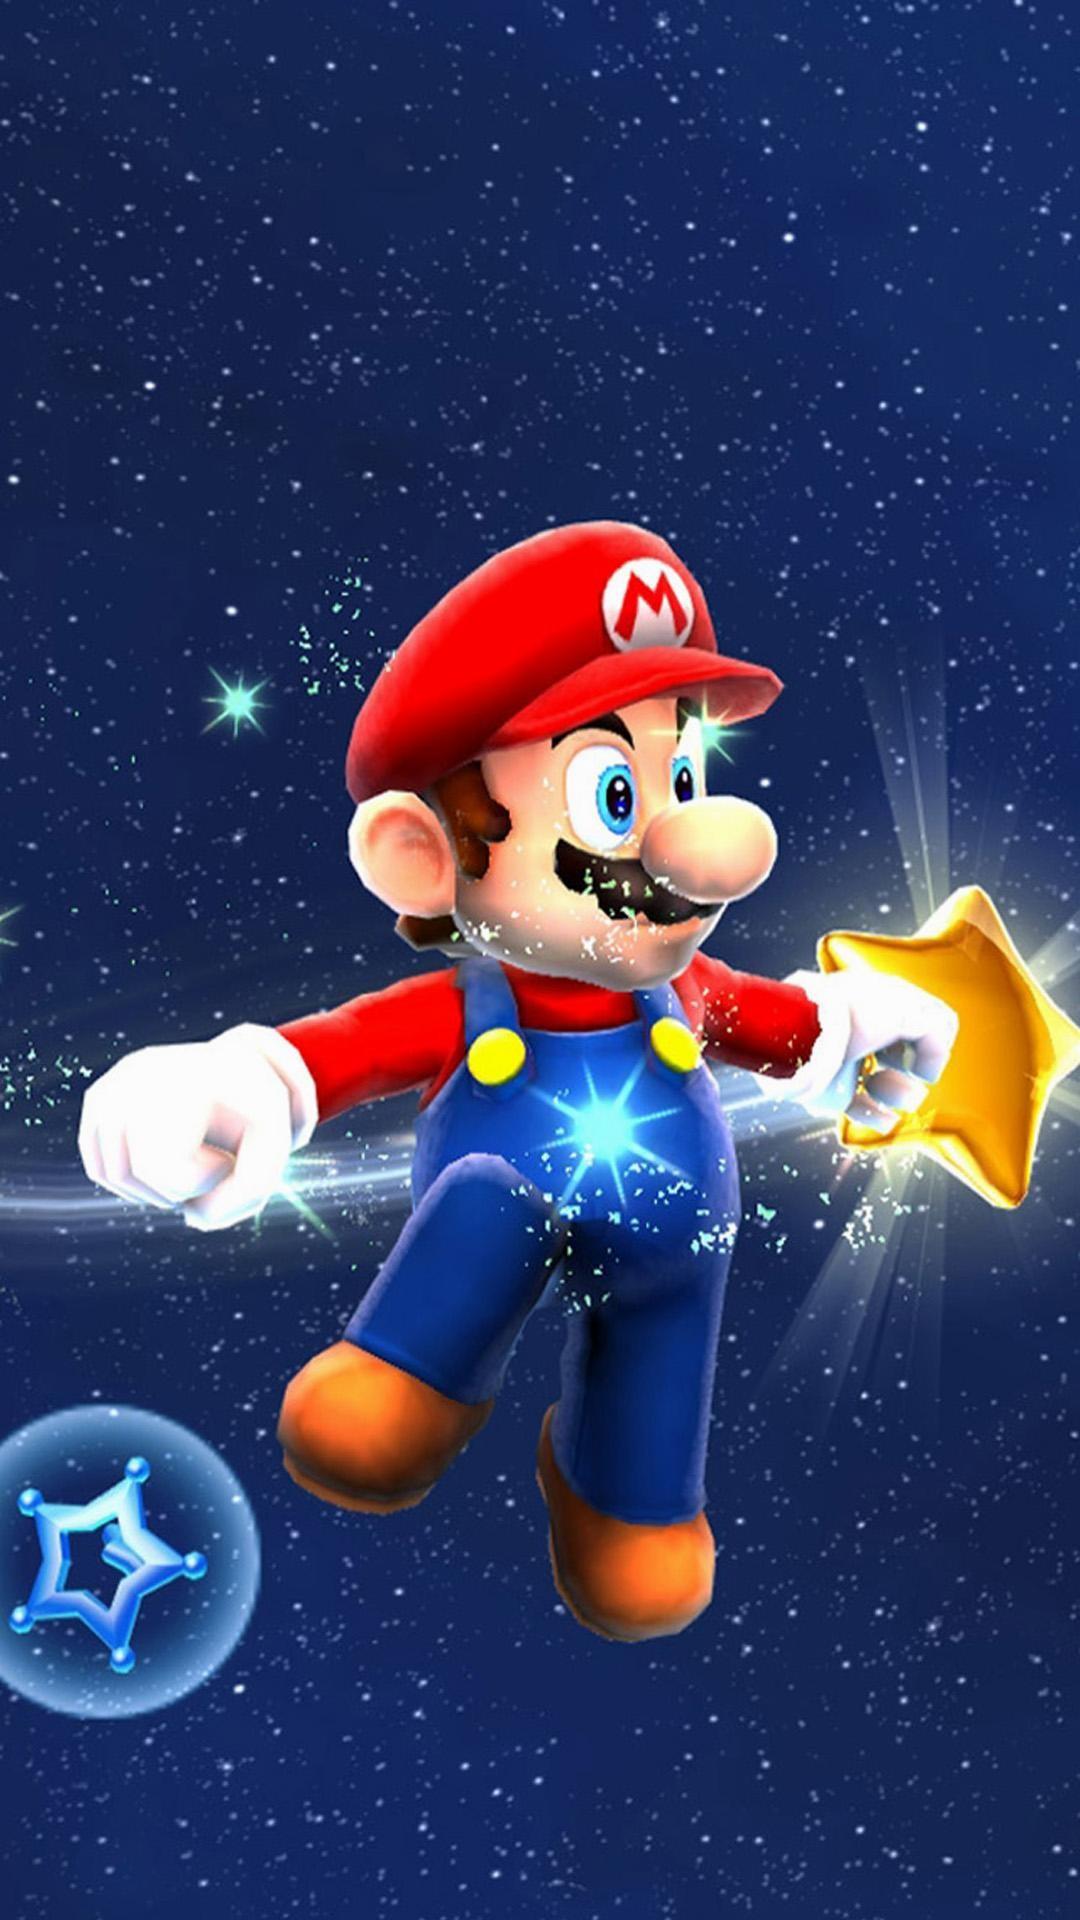 Cool Mario Bros wallpapers for iPhone in 2023 Free download in 2023   Super mario art Super mario bros party Mario bros